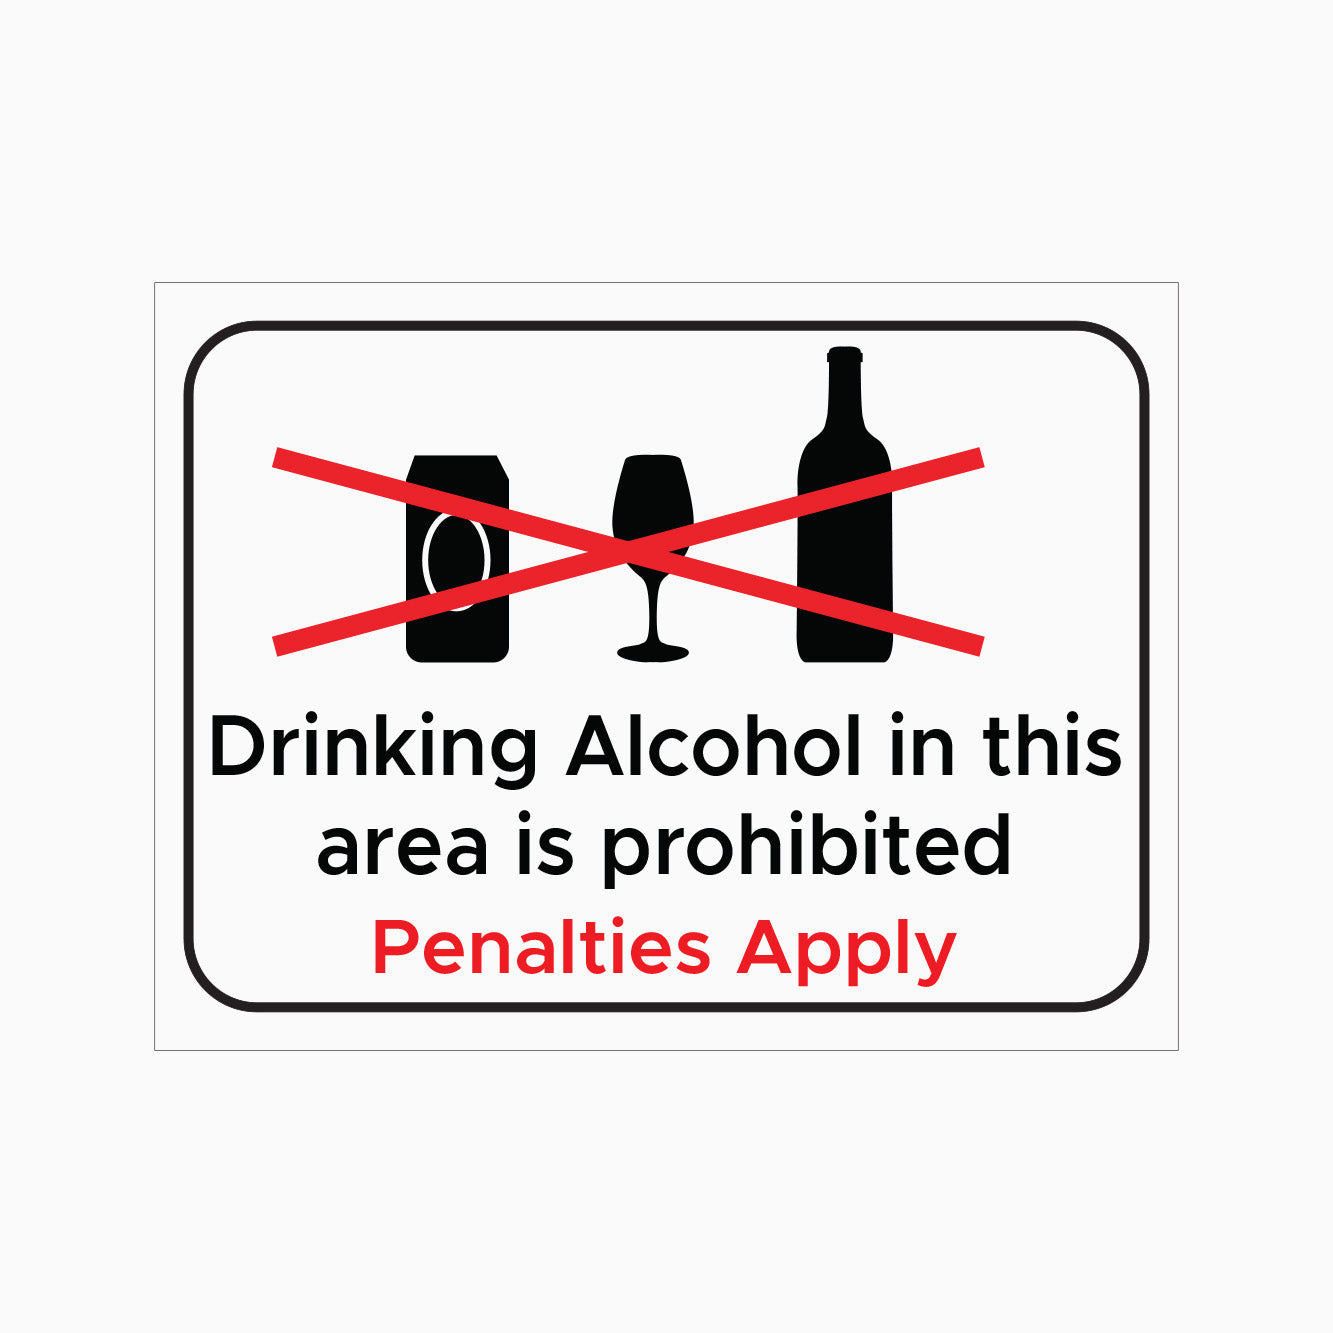 DRINKING ALCOHOL IN THIS AREA IS PROHIBITED SIGN - PENALTIES APPLY